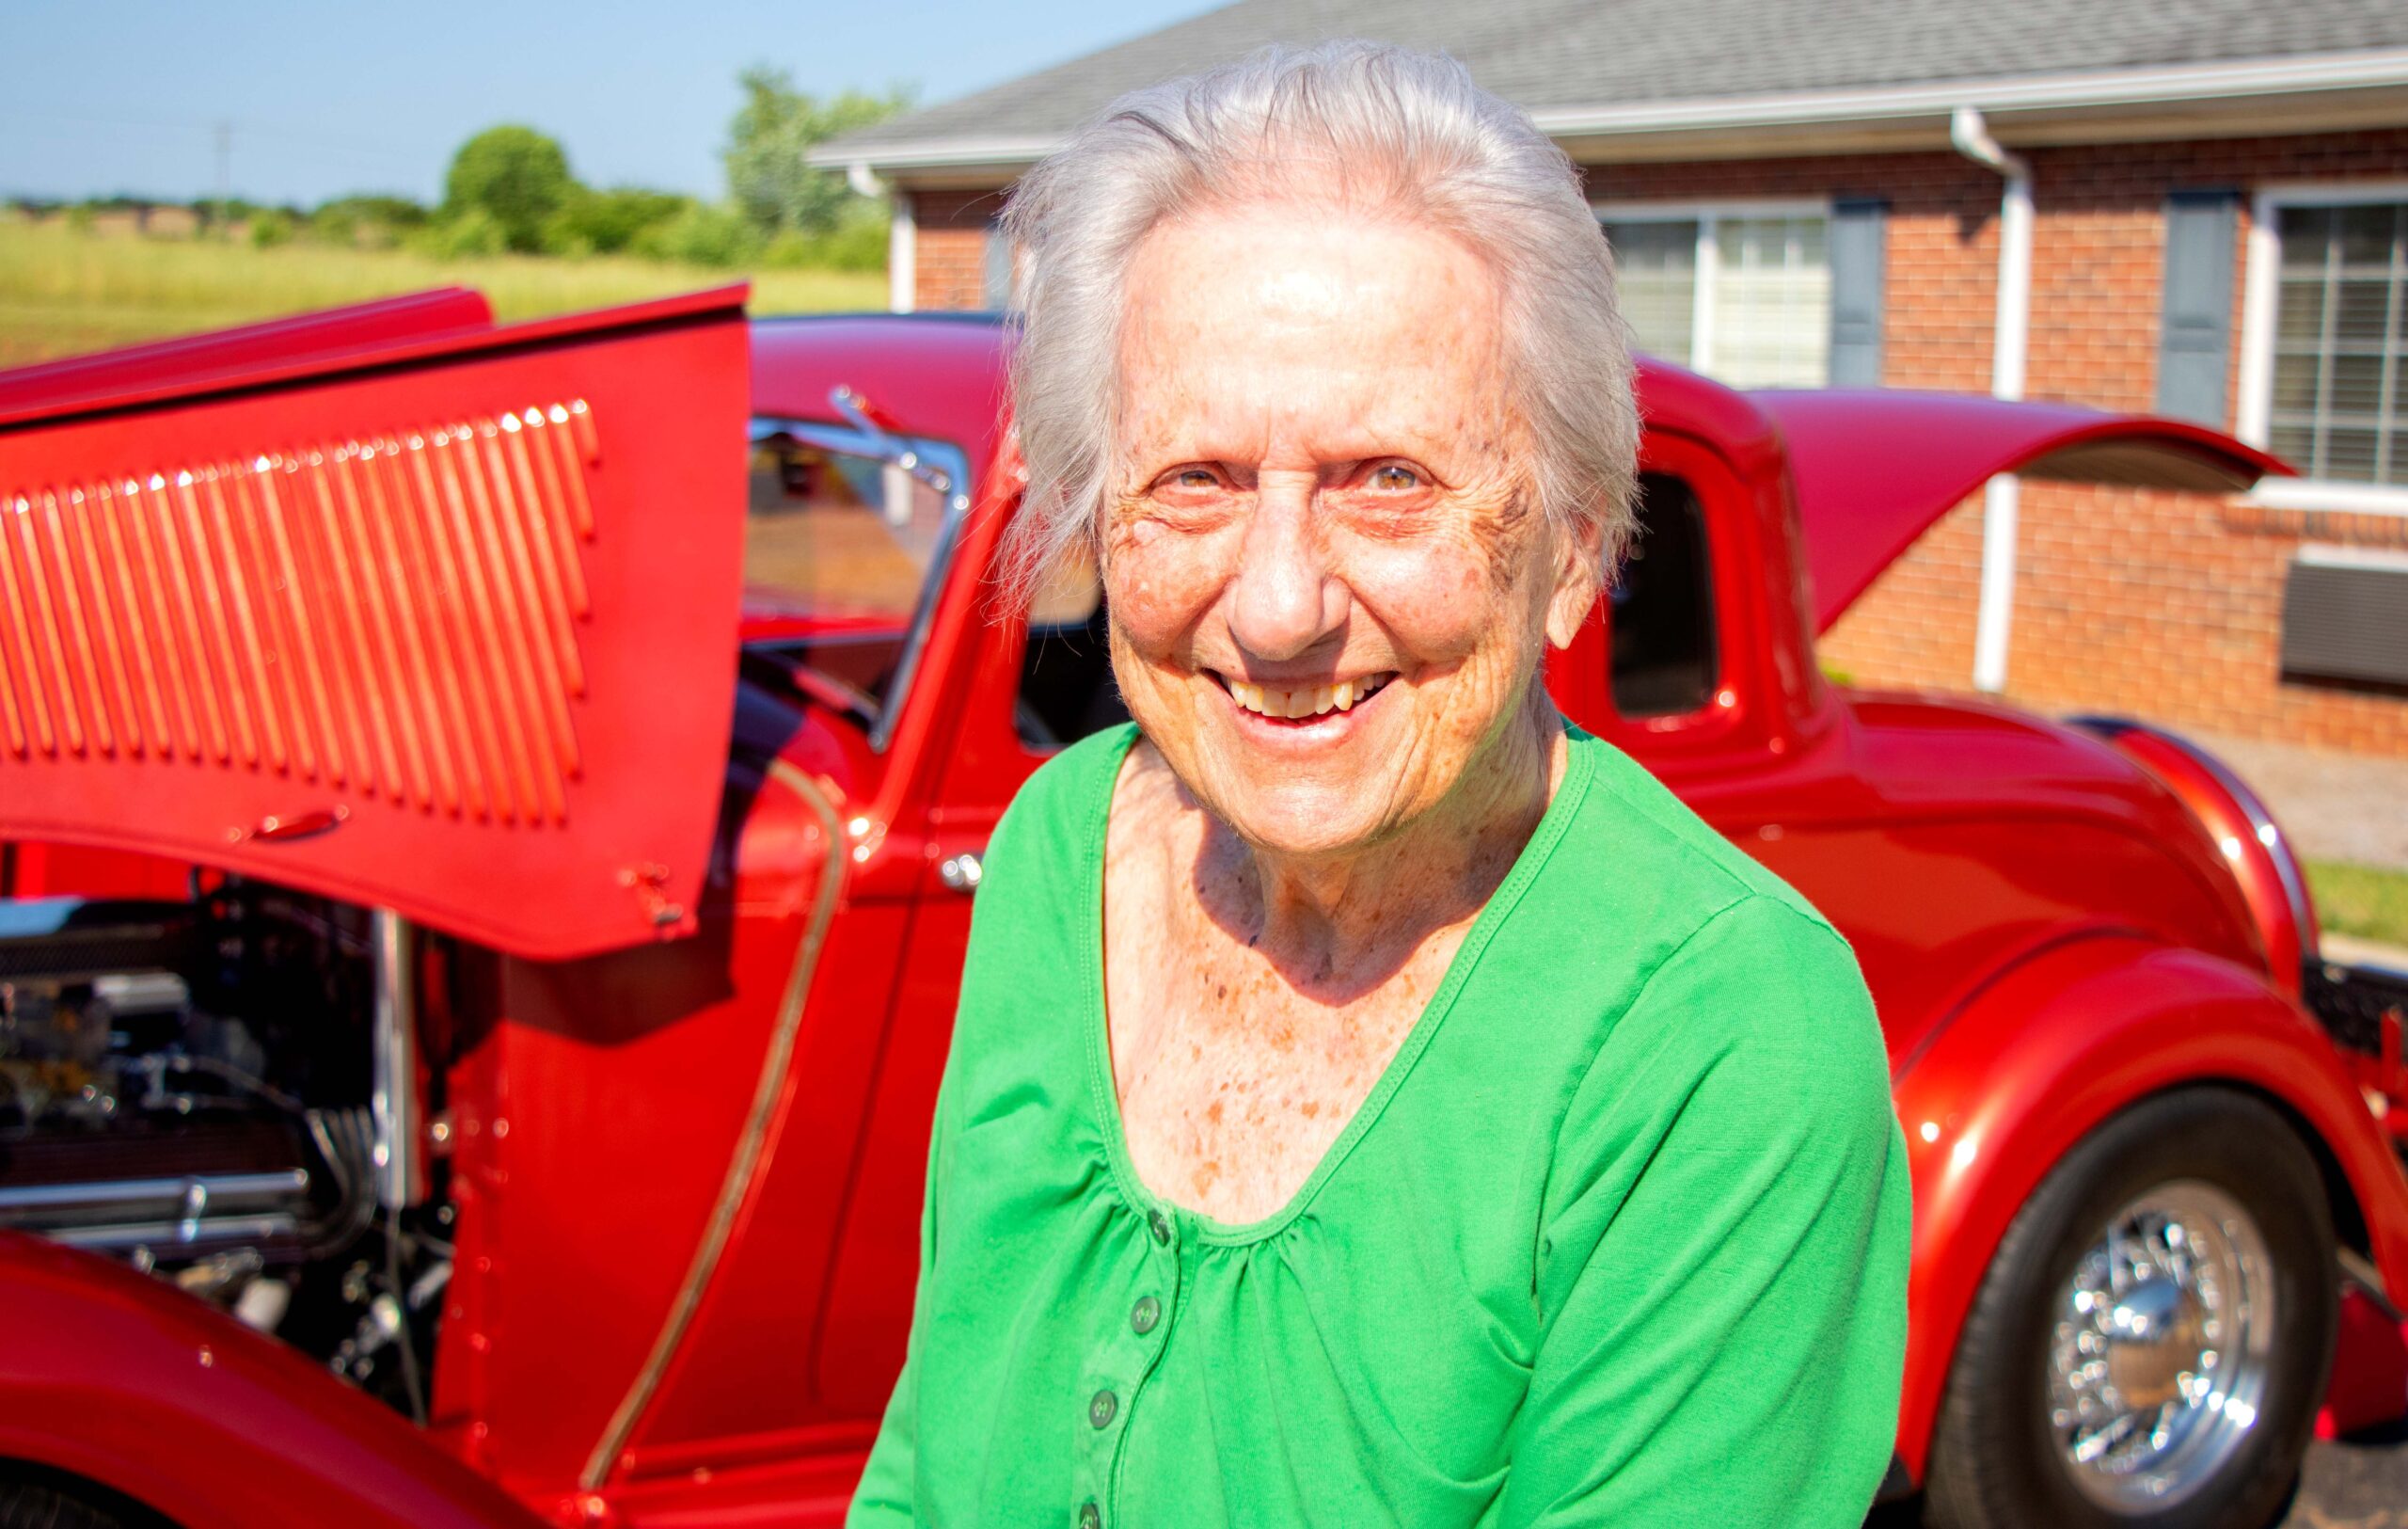 Even though most of the cars at the show were Corvettes, this ’39 Pontiac hot rod stole the hearts of many of the residents who came out to enjoy the nostalgia of their youth. Photo provided by Wexford House Assisted Living